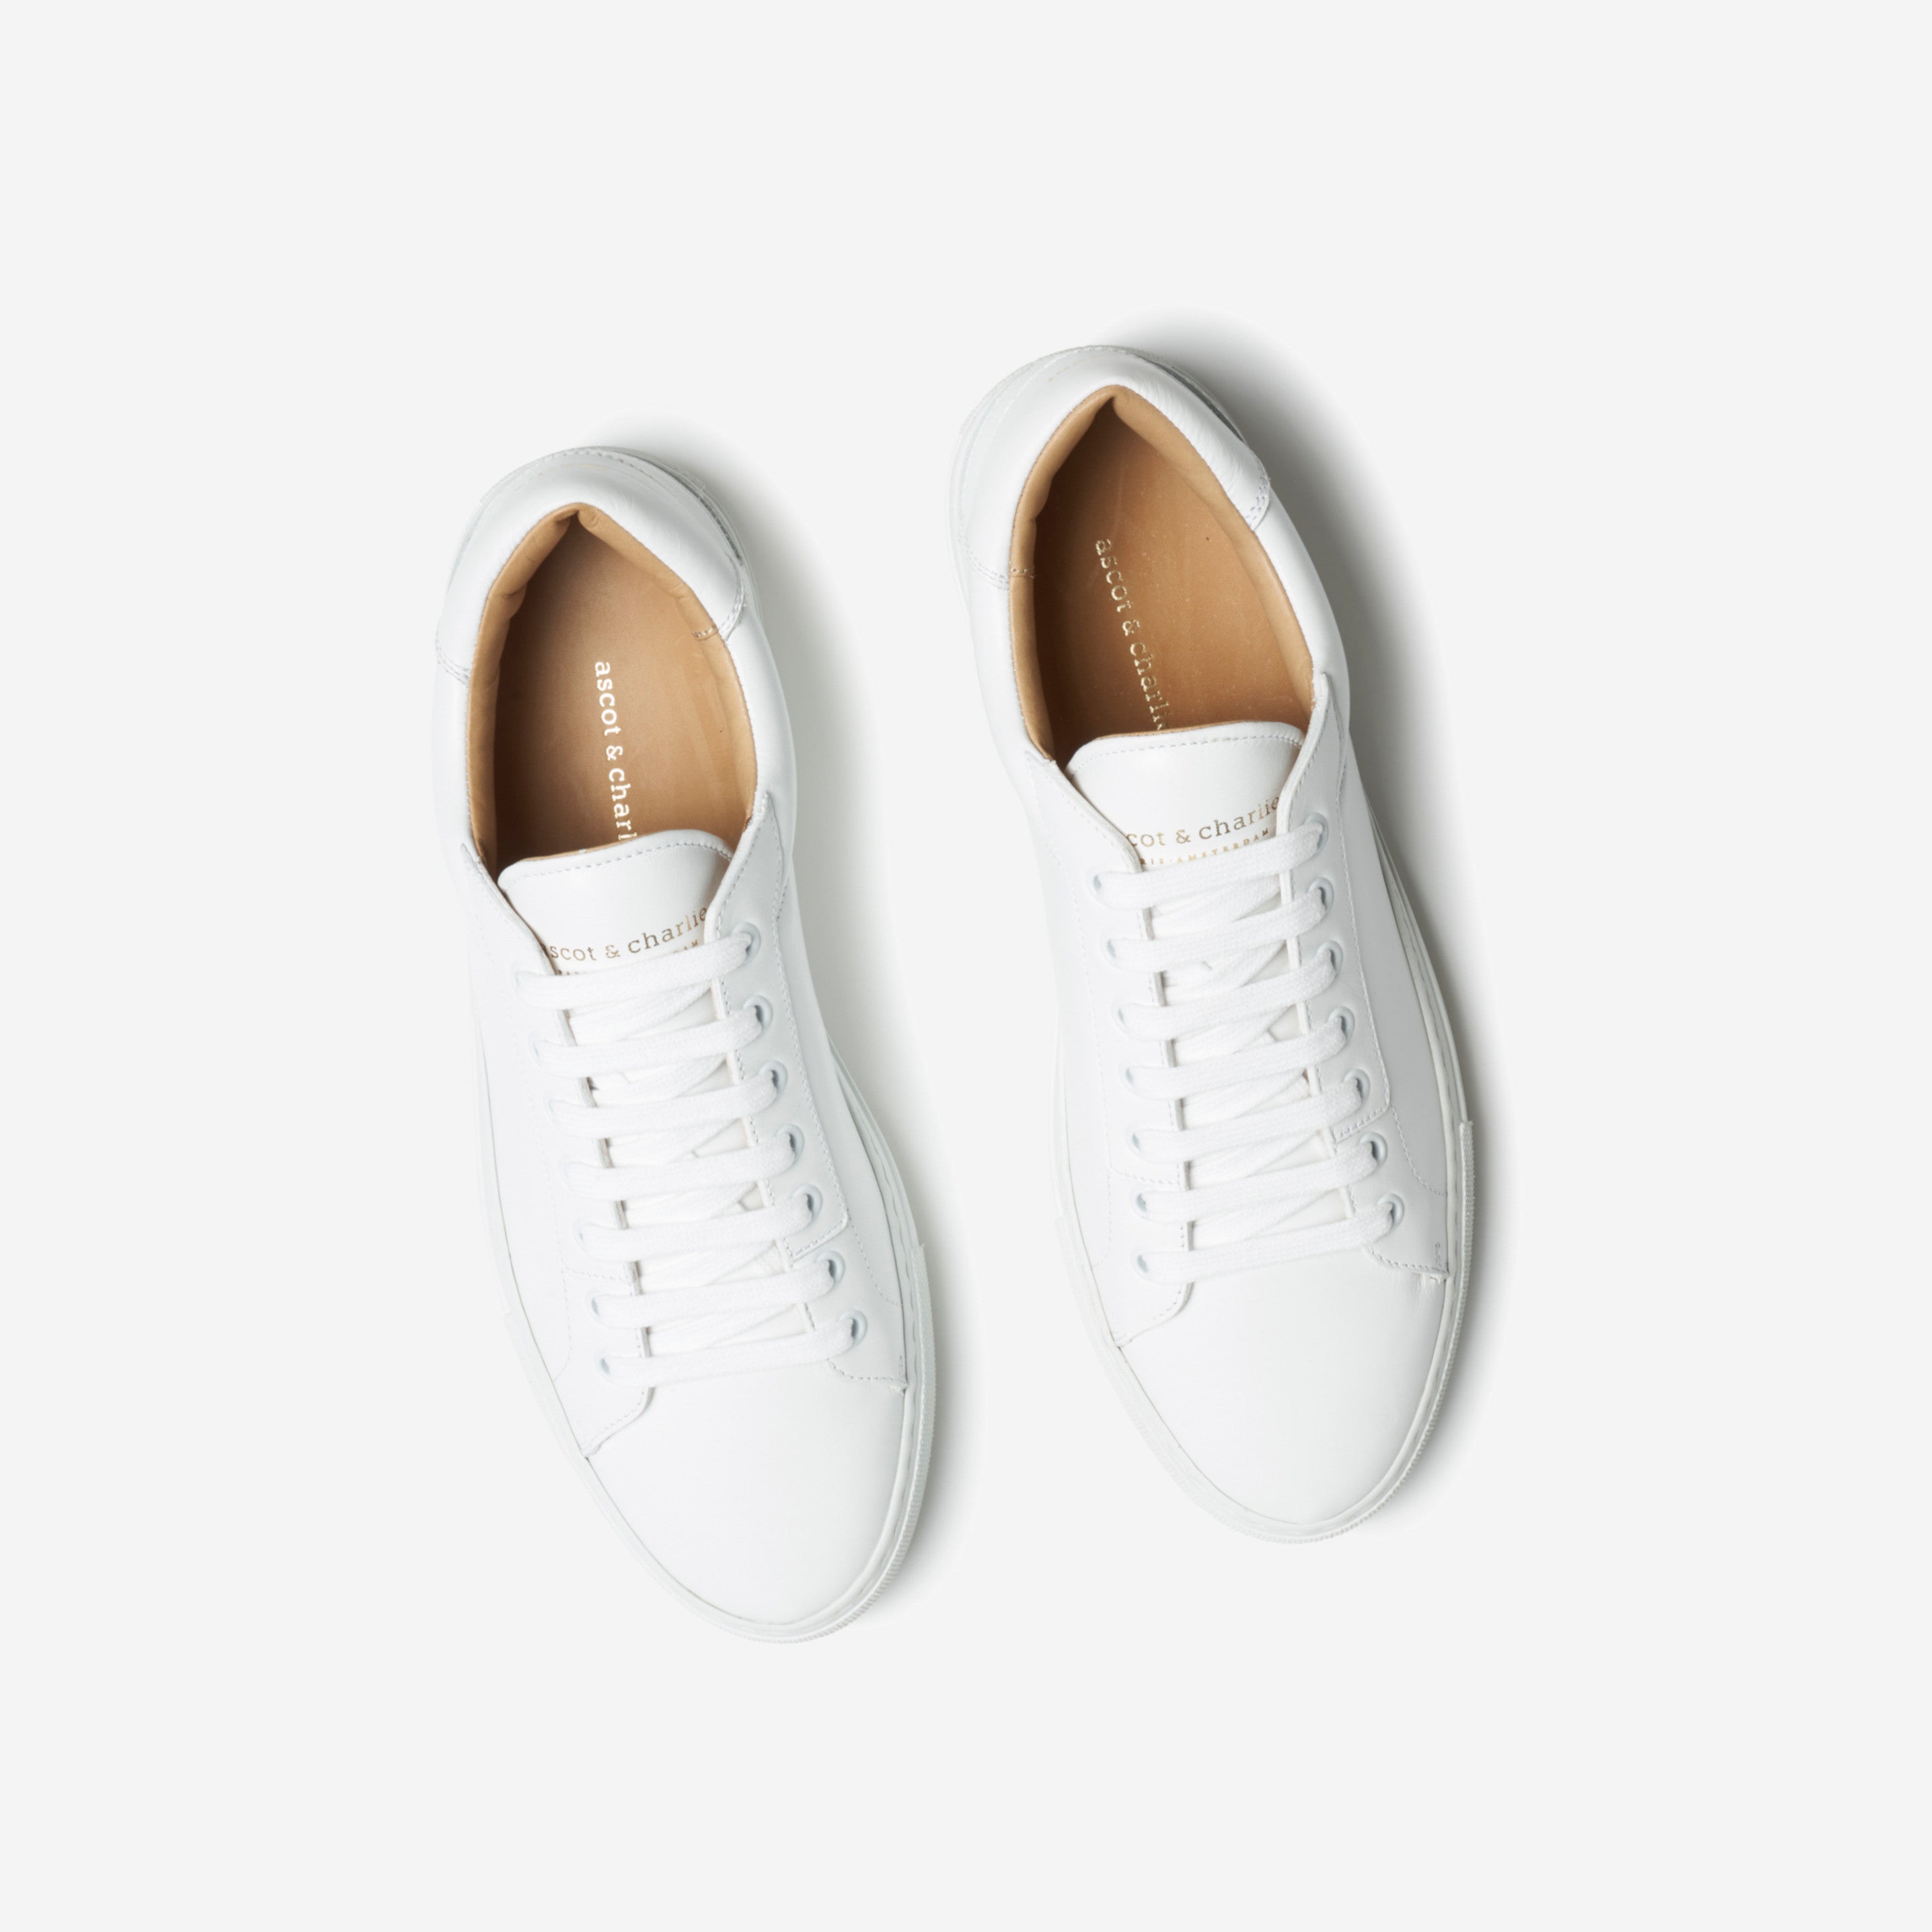 Lione Sneakers - White – Ascot X Charlie